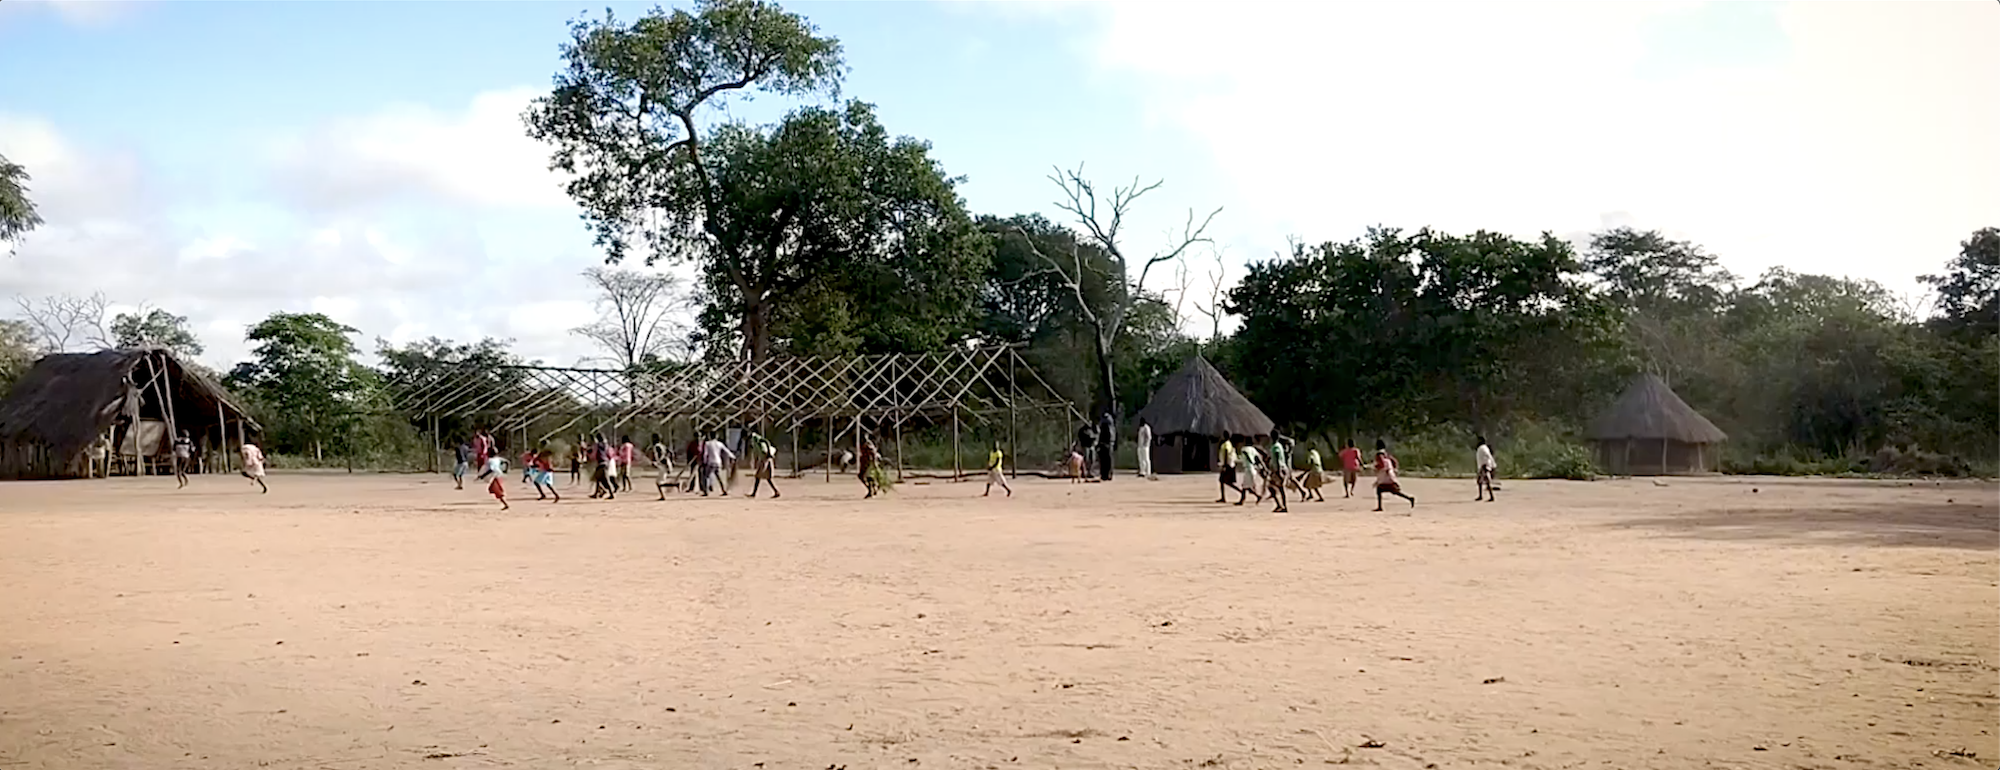 children play soccer in mozambique